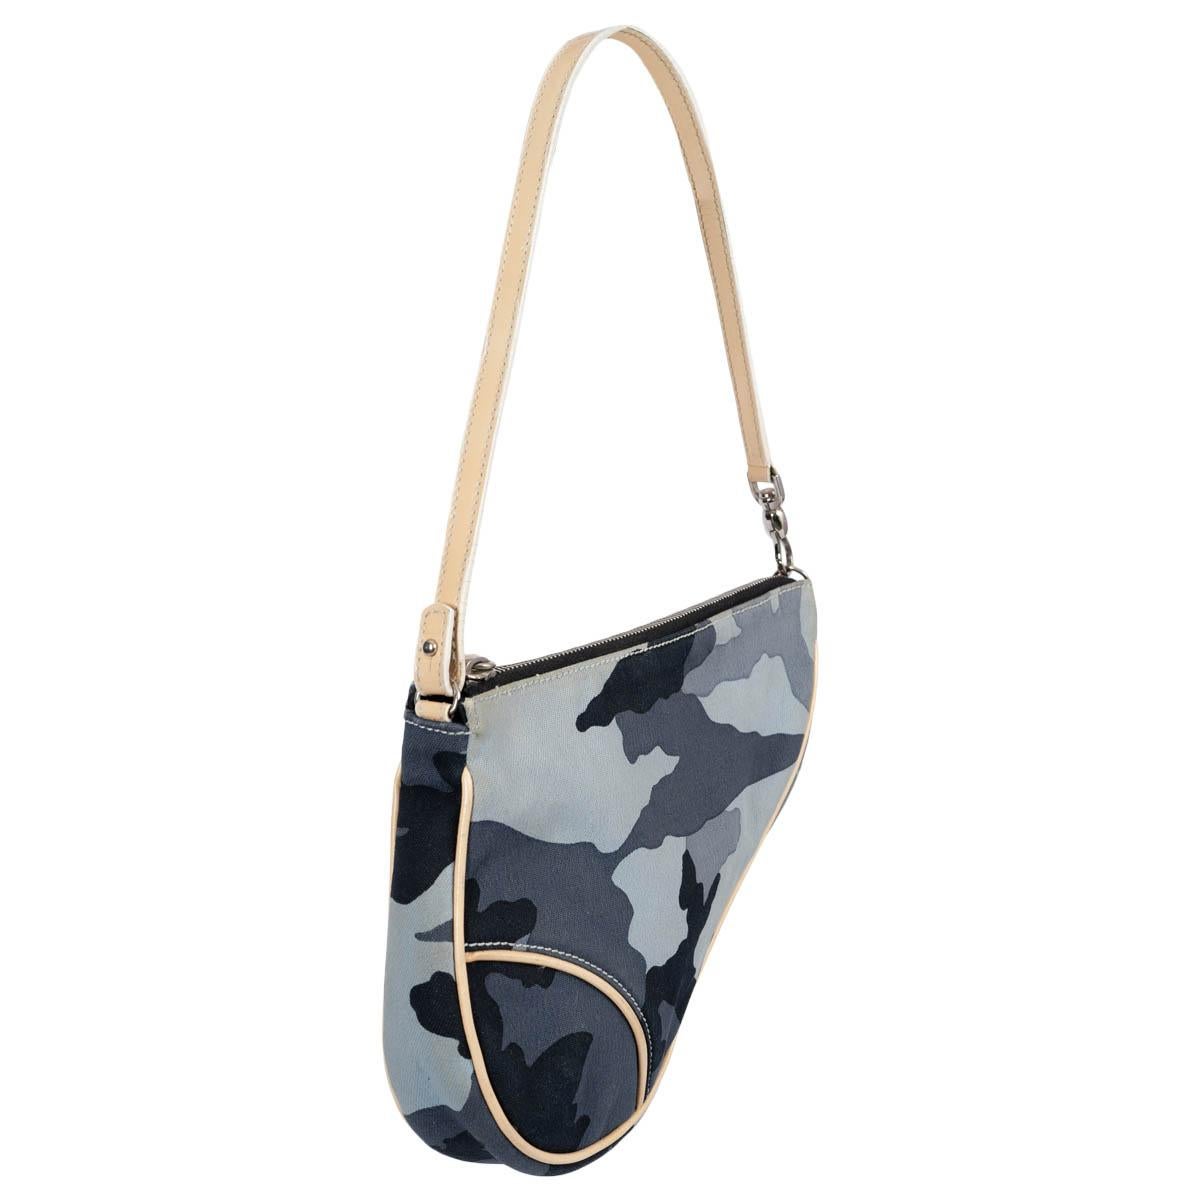 100% authentic Christian Dior by John Galliano Mini Saddle pochette bag in blue camouflage canvas with cream leather trims. Closes with zipper on top and is lined oblique monogram nylon. Has been carried and is in excellent condition. Comes with